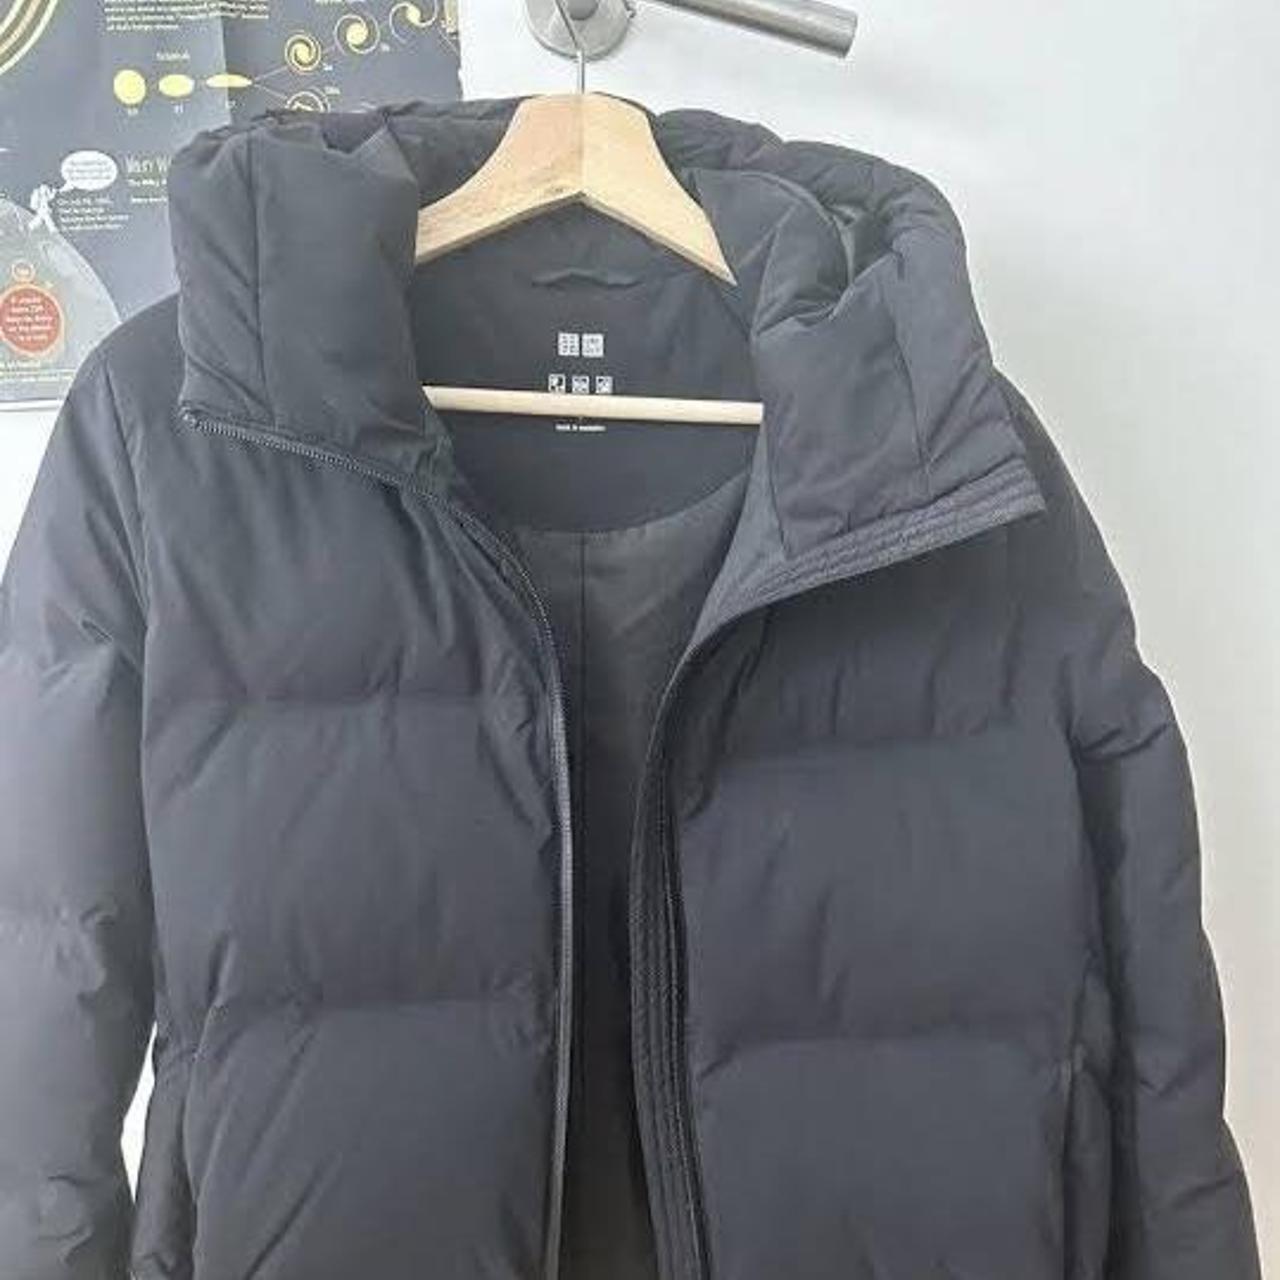 3 Uniqlo 3d cut seamless parkas in stock. Comes wit... - Depop